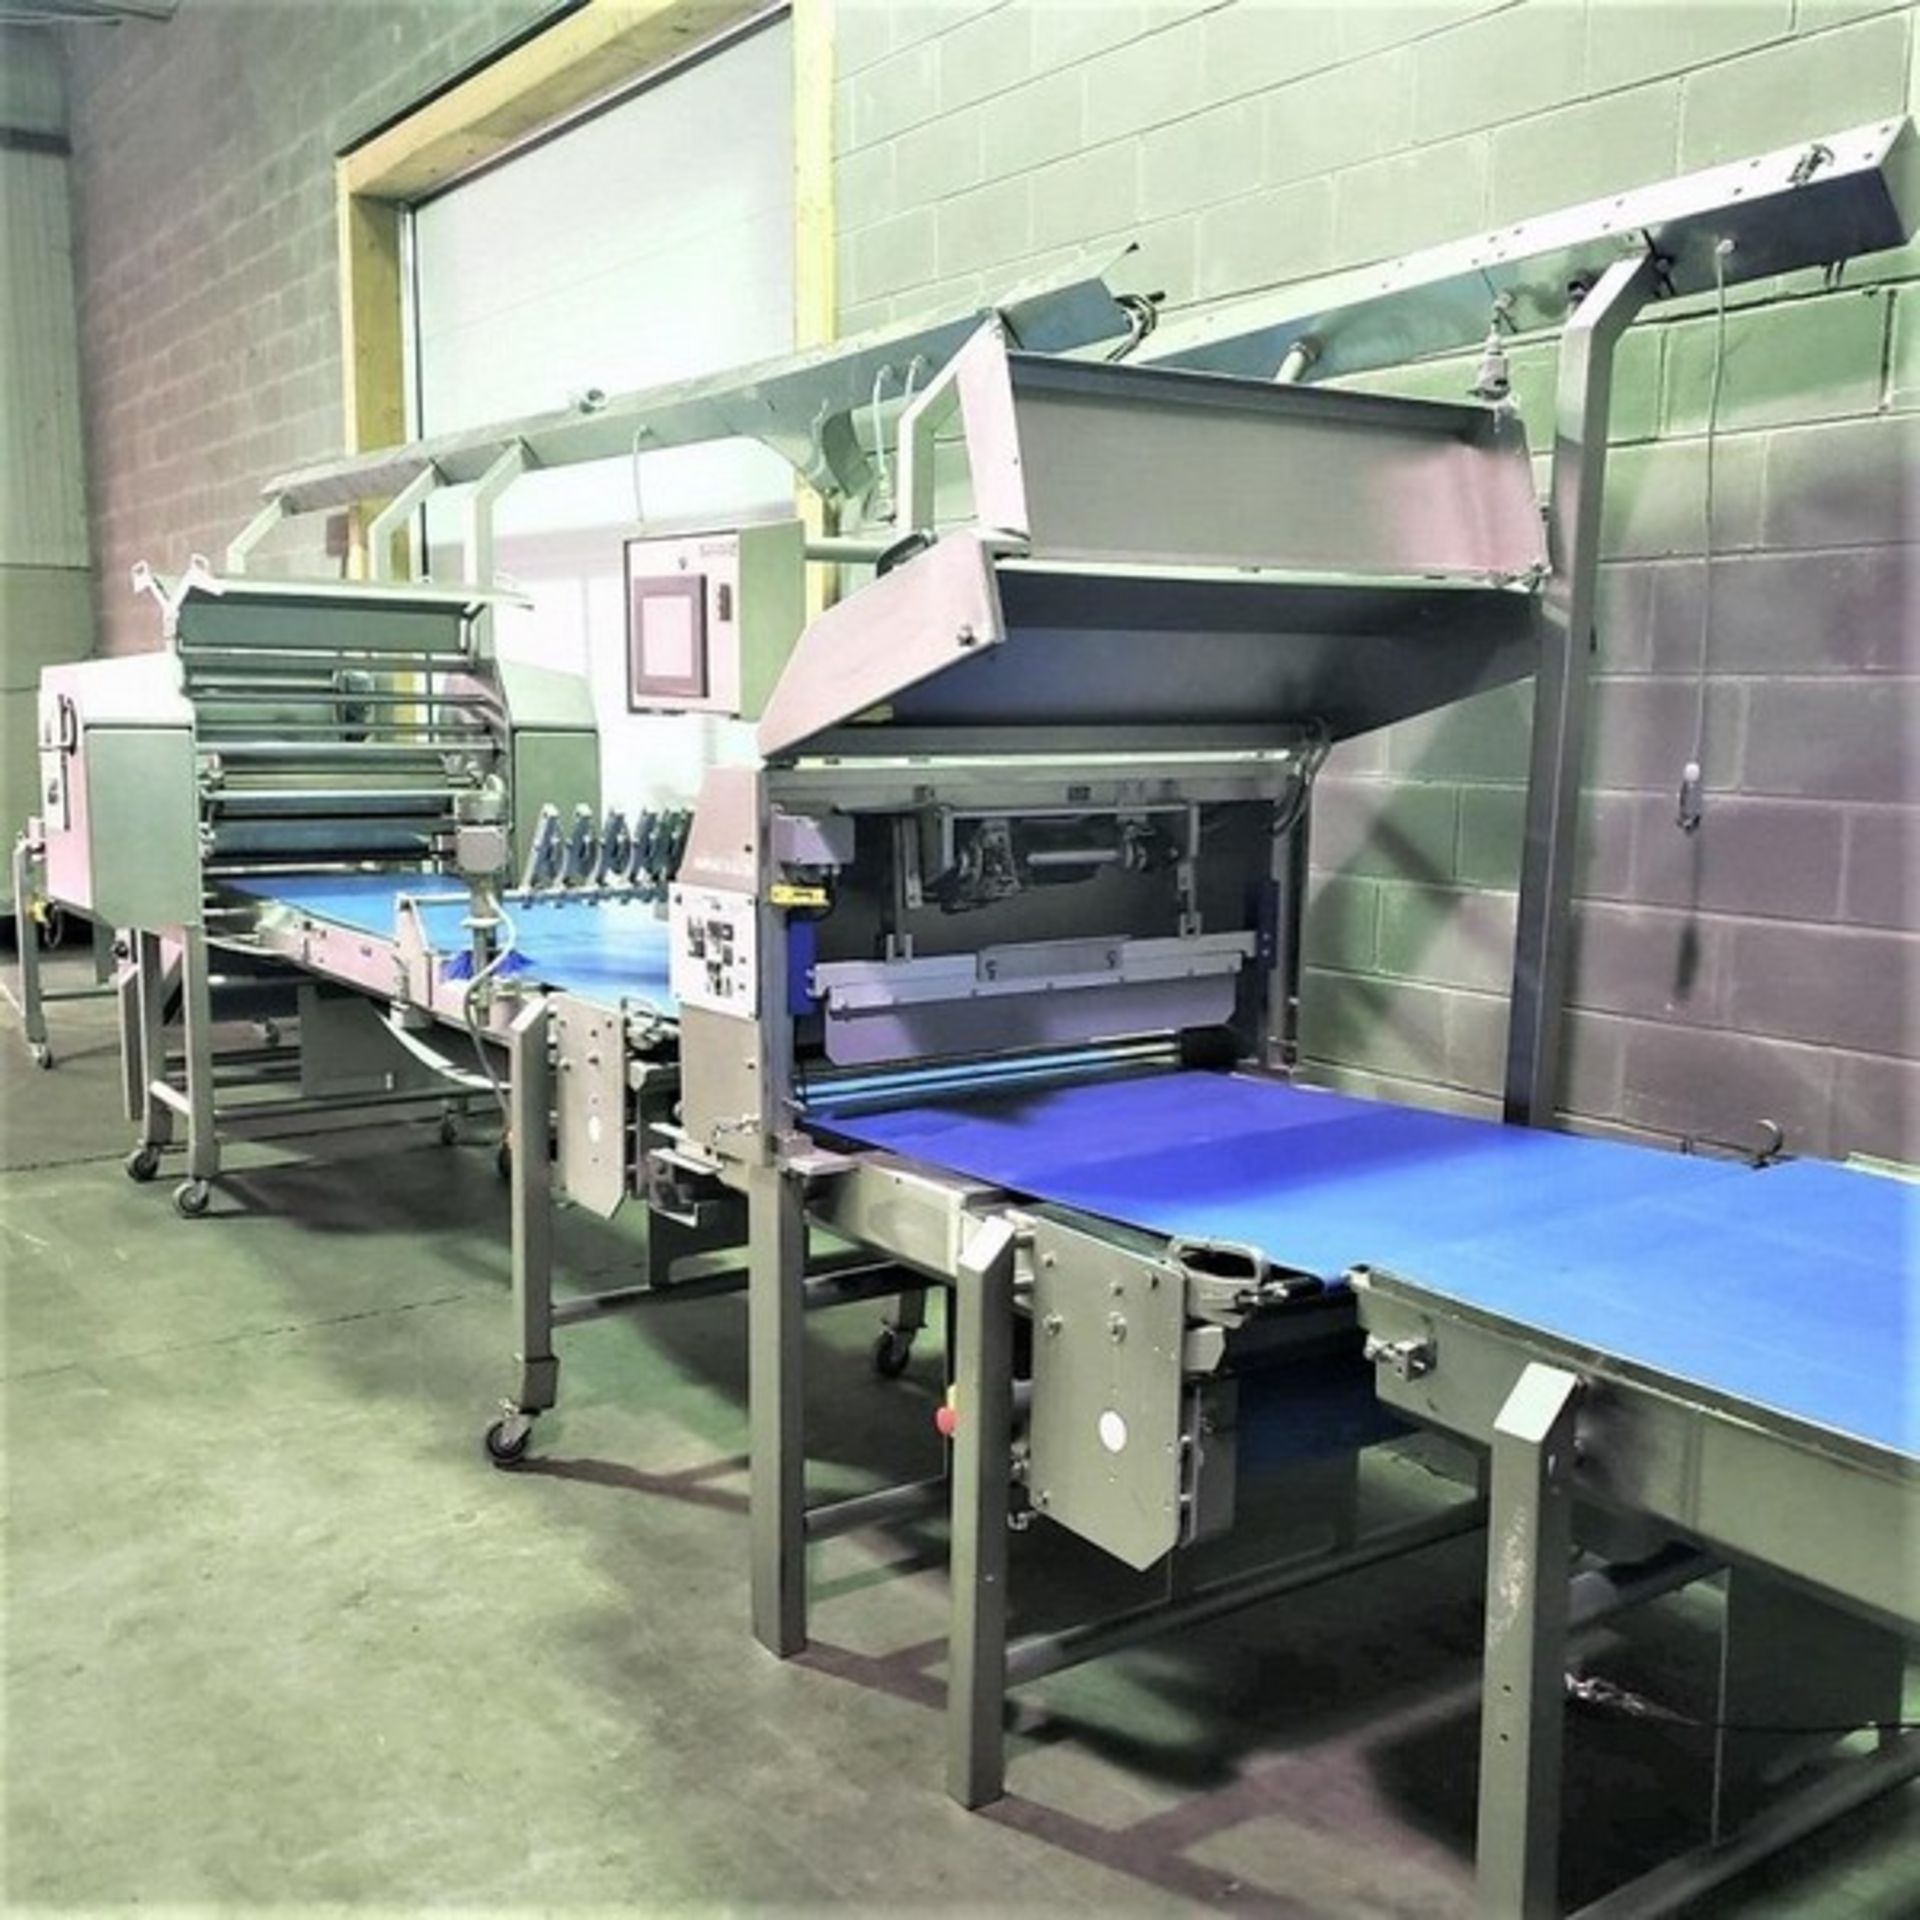 Tromp Bakery Line multi-purpose S/S Combines Dough and Flour Depositin, With Roller Sheeting, Fold